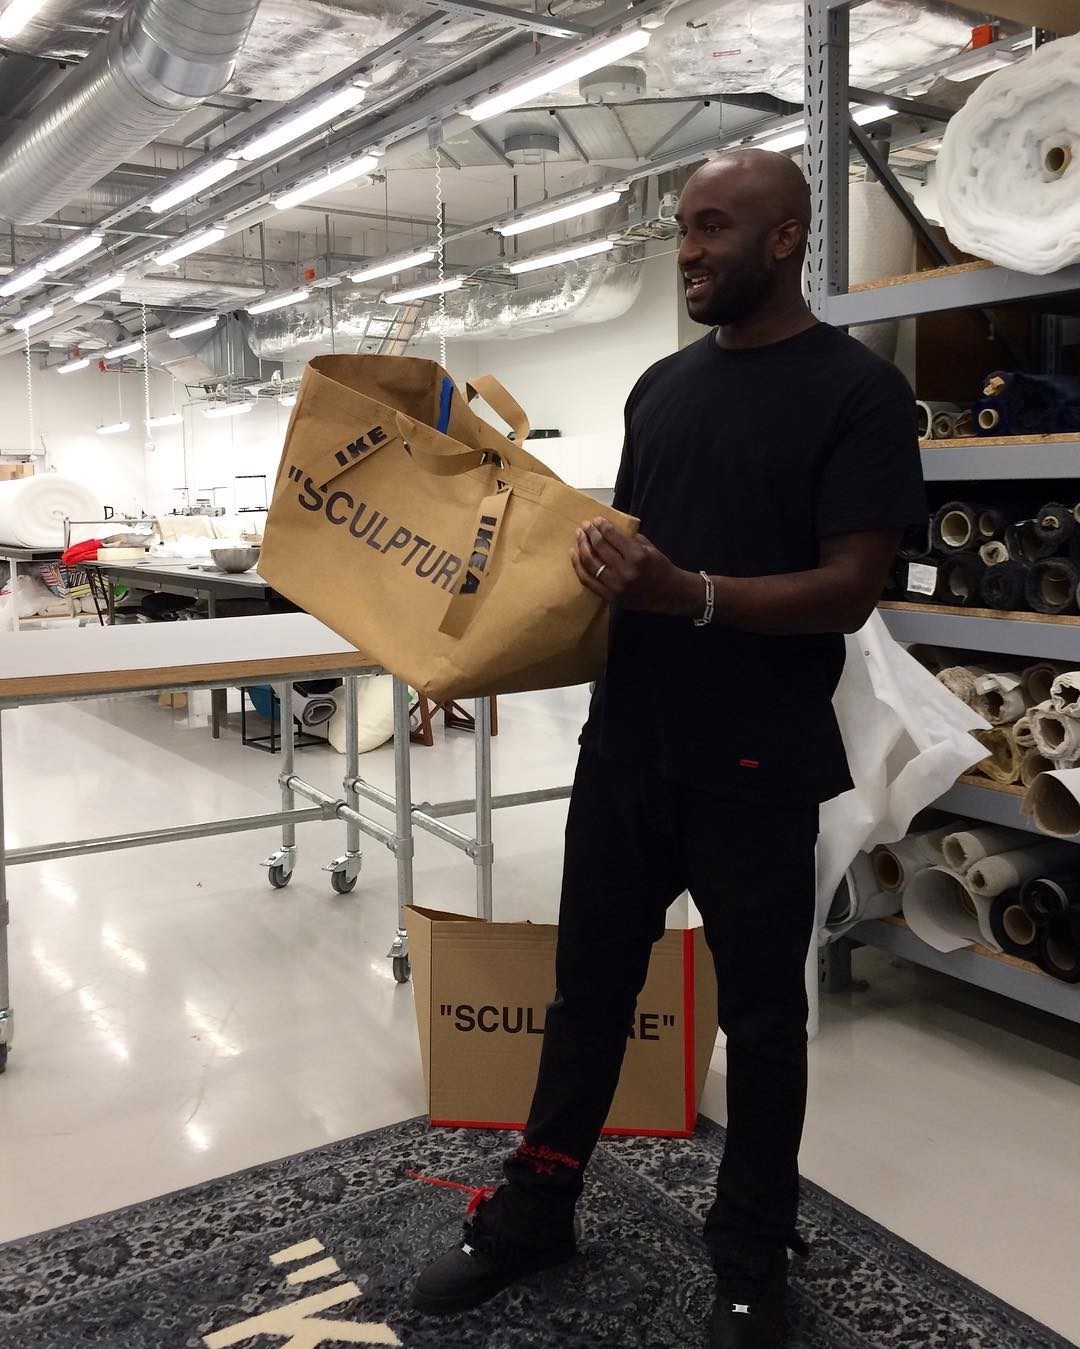 Fashion You Can't Wear: Why Ikea x Virgil Abloh Works